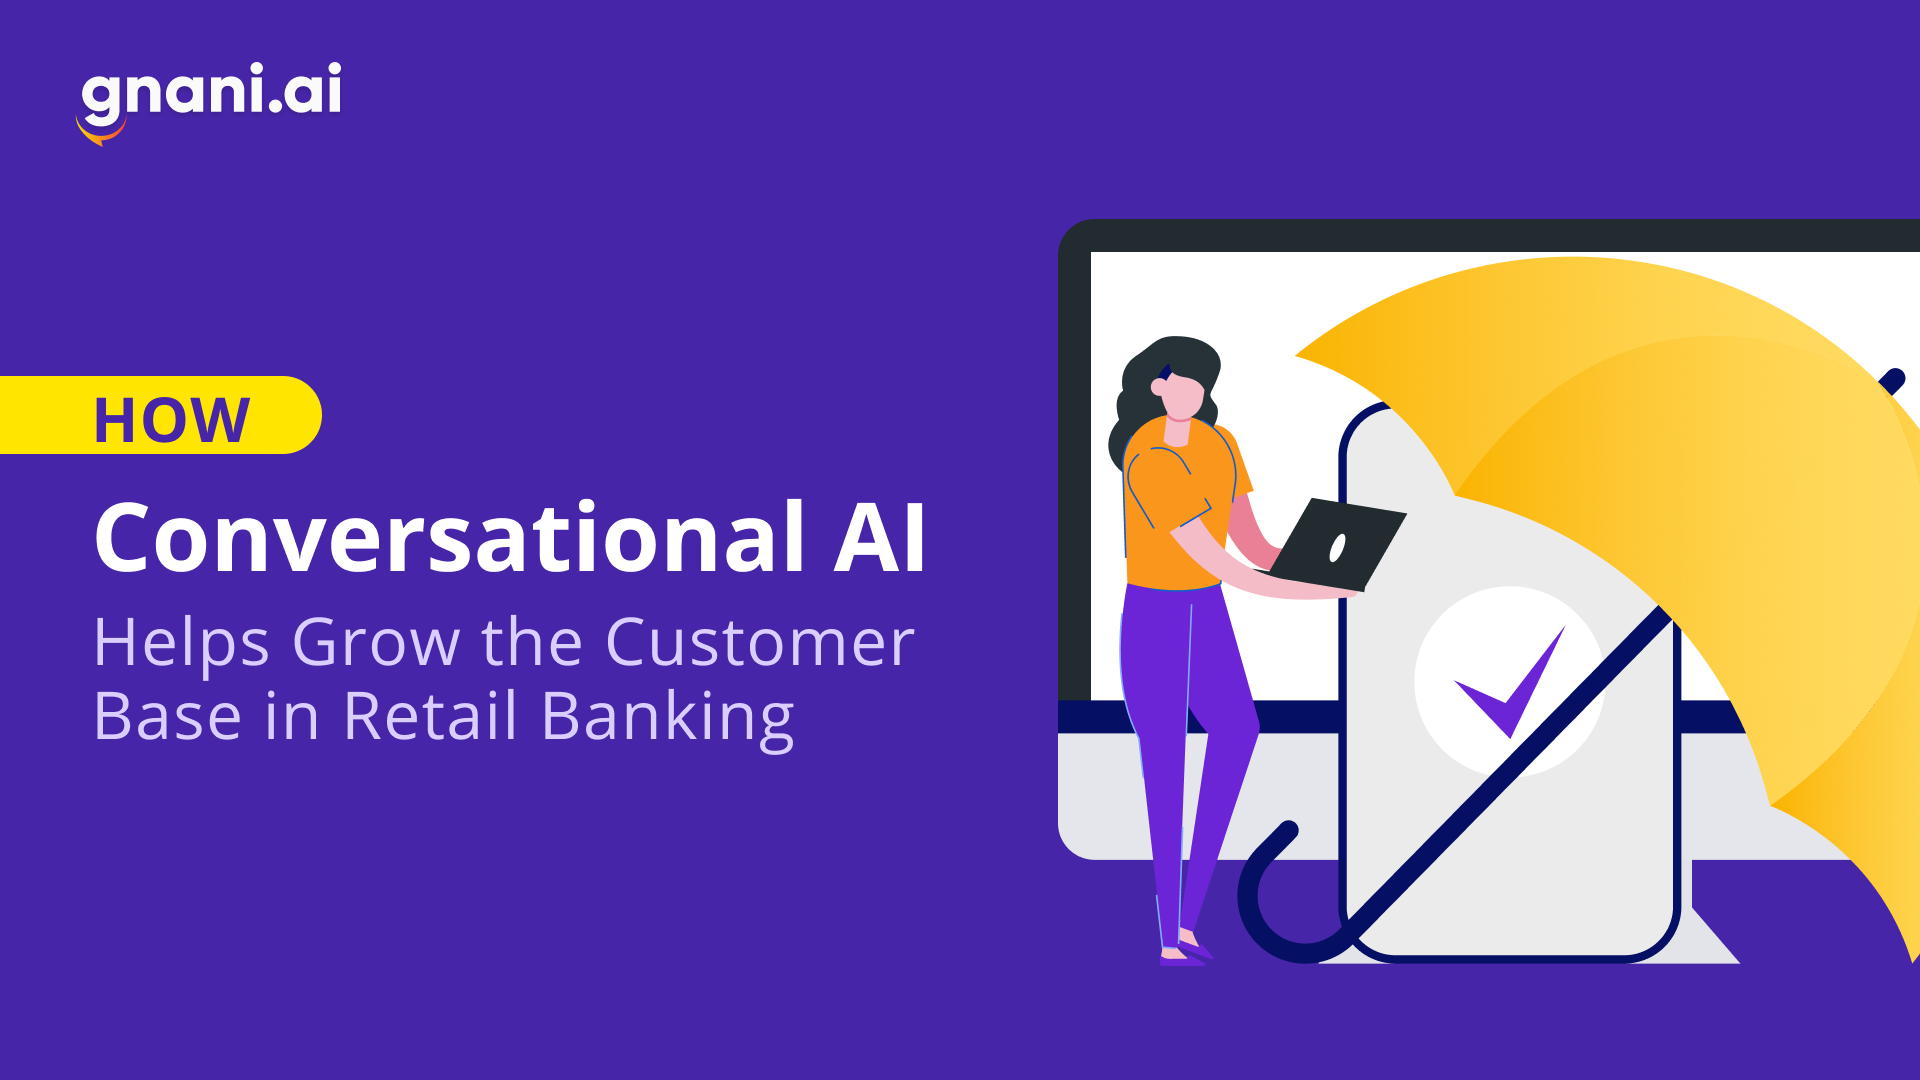 conversational ai in retail banking featured image